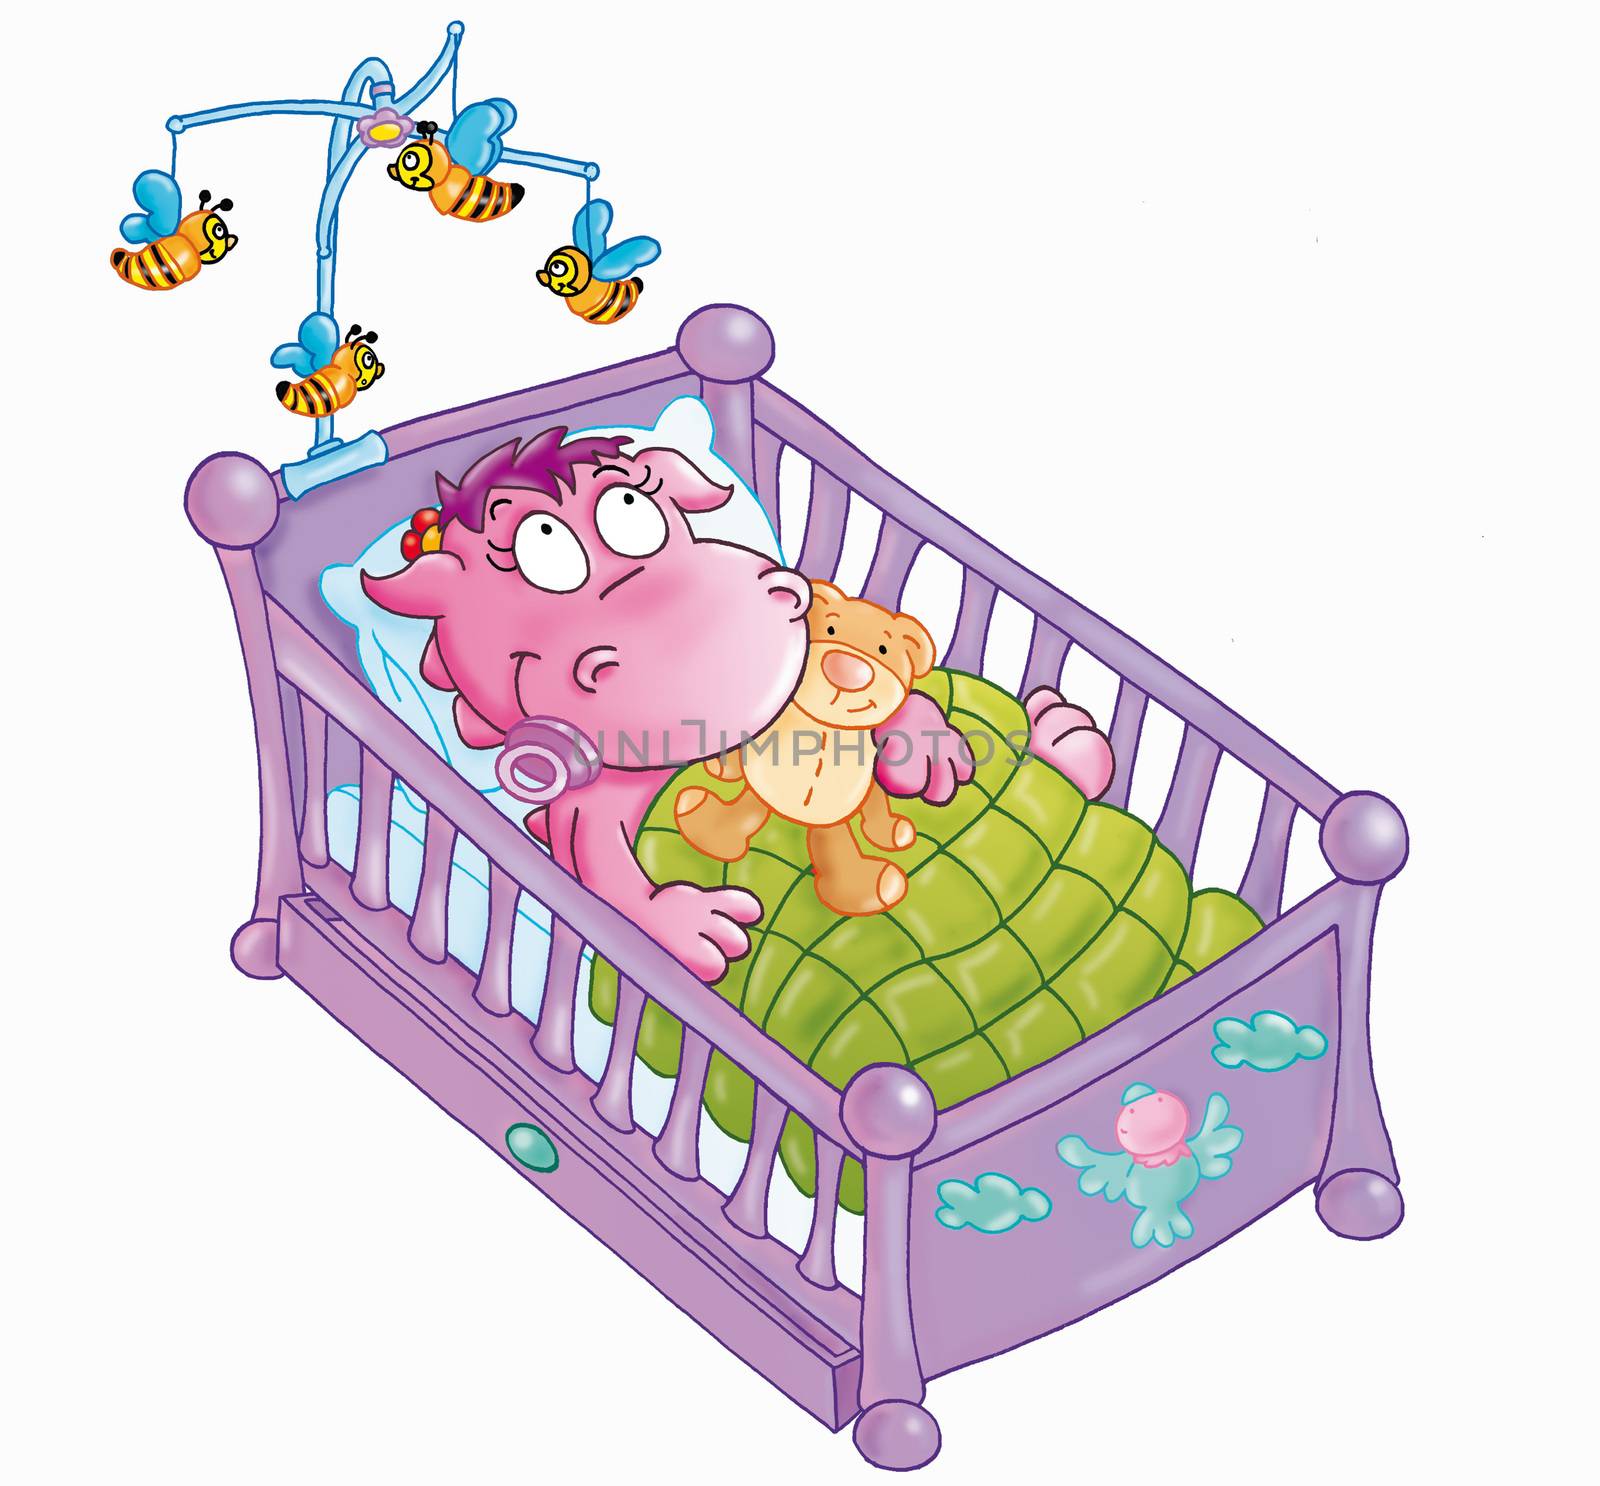 The little dragon sleeps in the cot







√